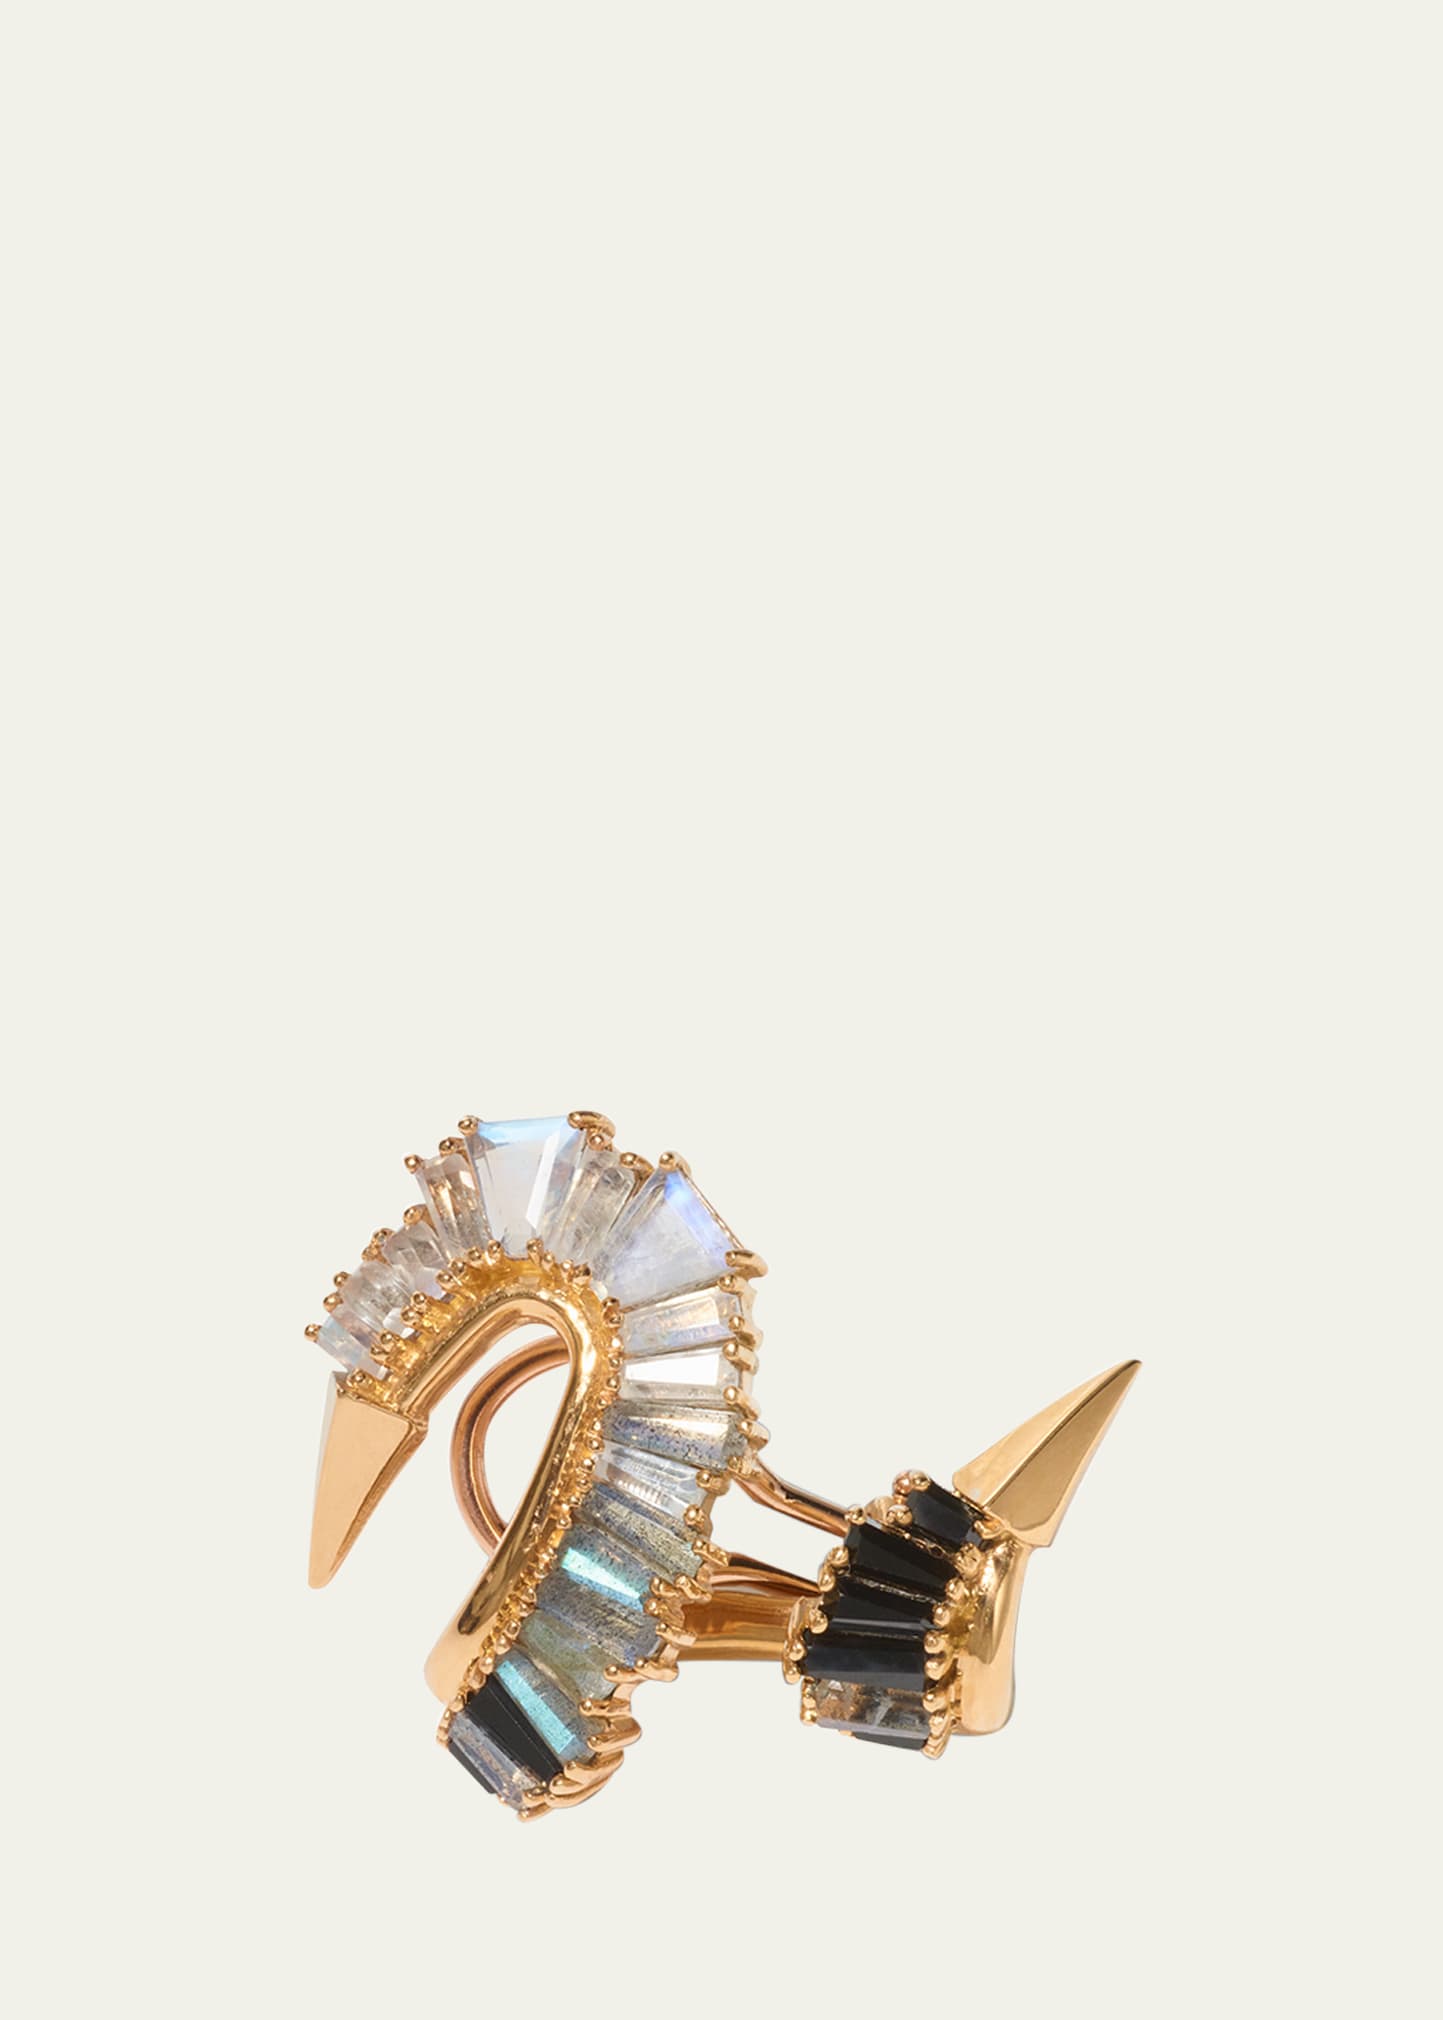 Nak Armstrong 20k Recycled Rose Gold Serpent Ear Cuff With Rainbow Moonstone, Labradorite And Black Spinel, Single In Rg